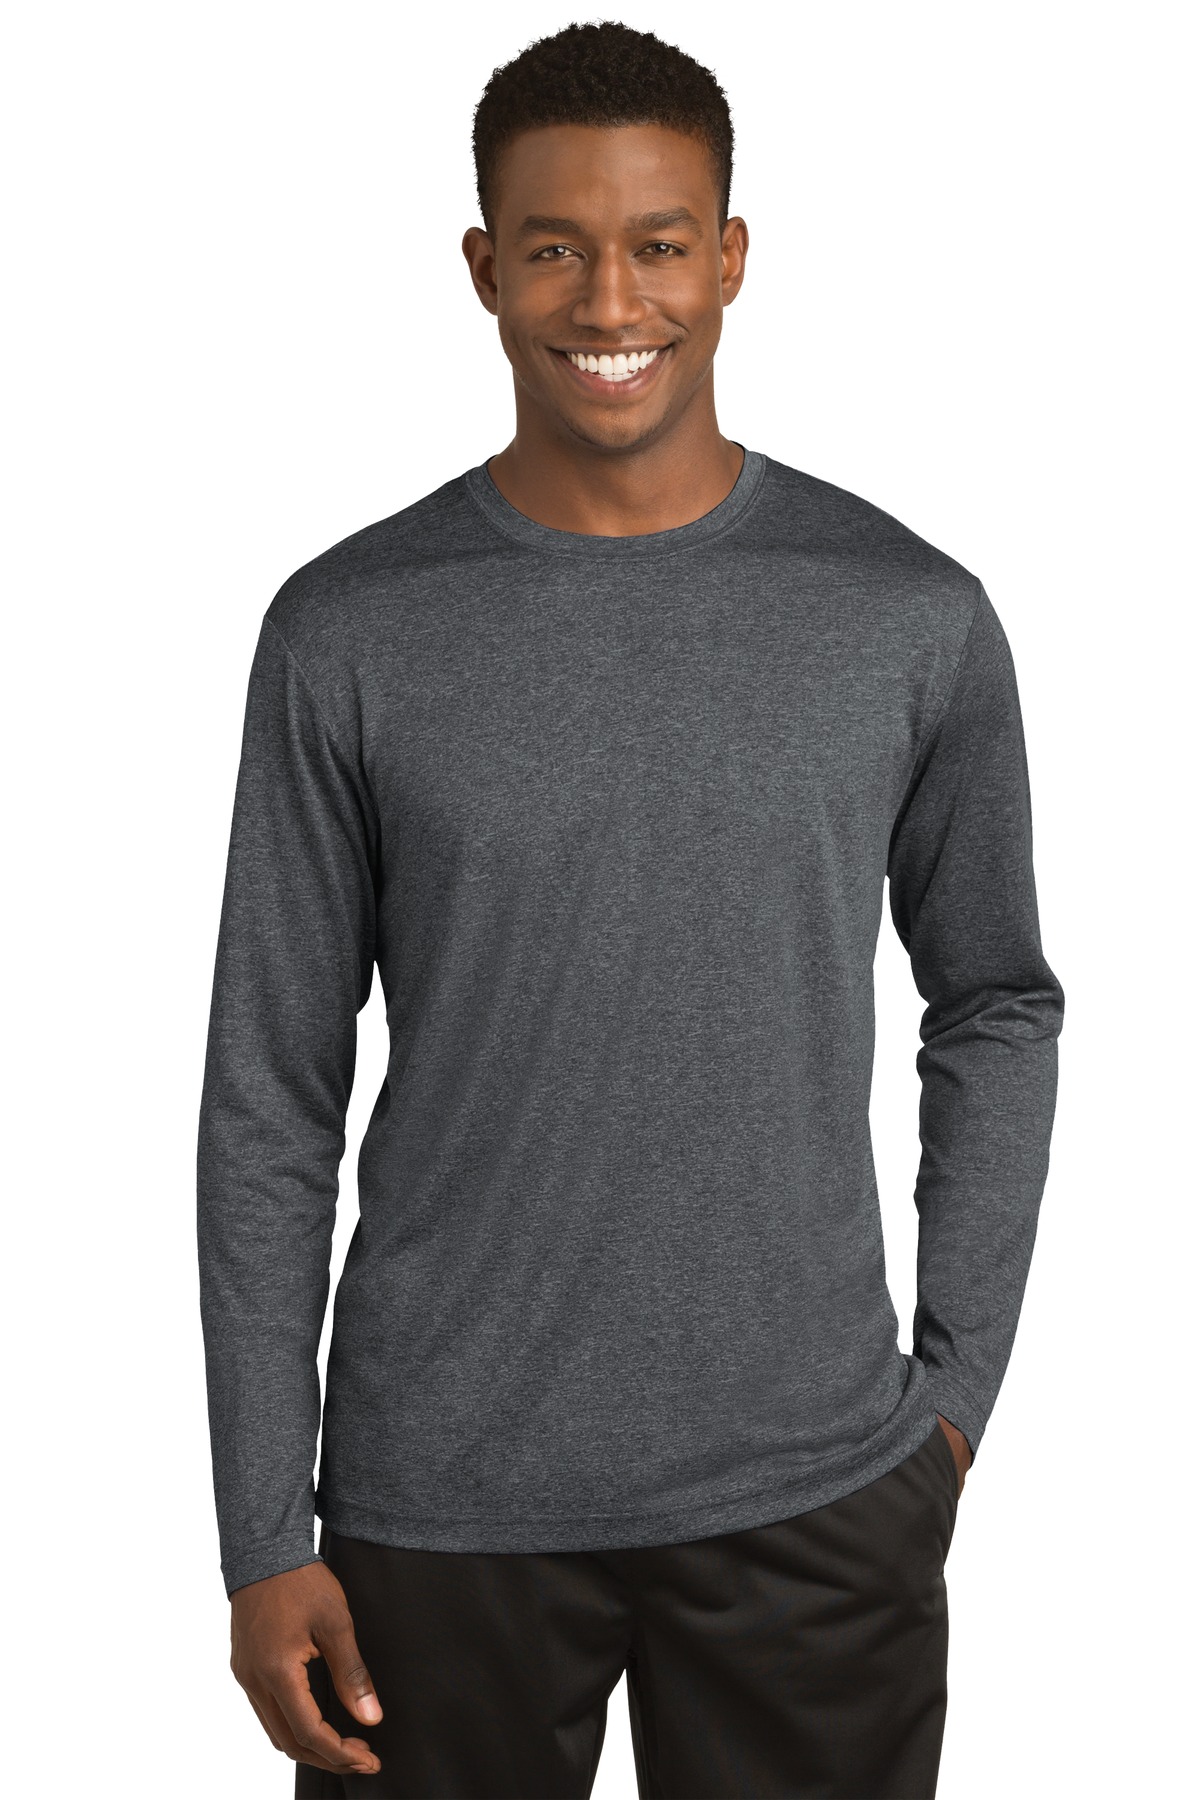 Front view of Long Sleeve Heather Contender Tee